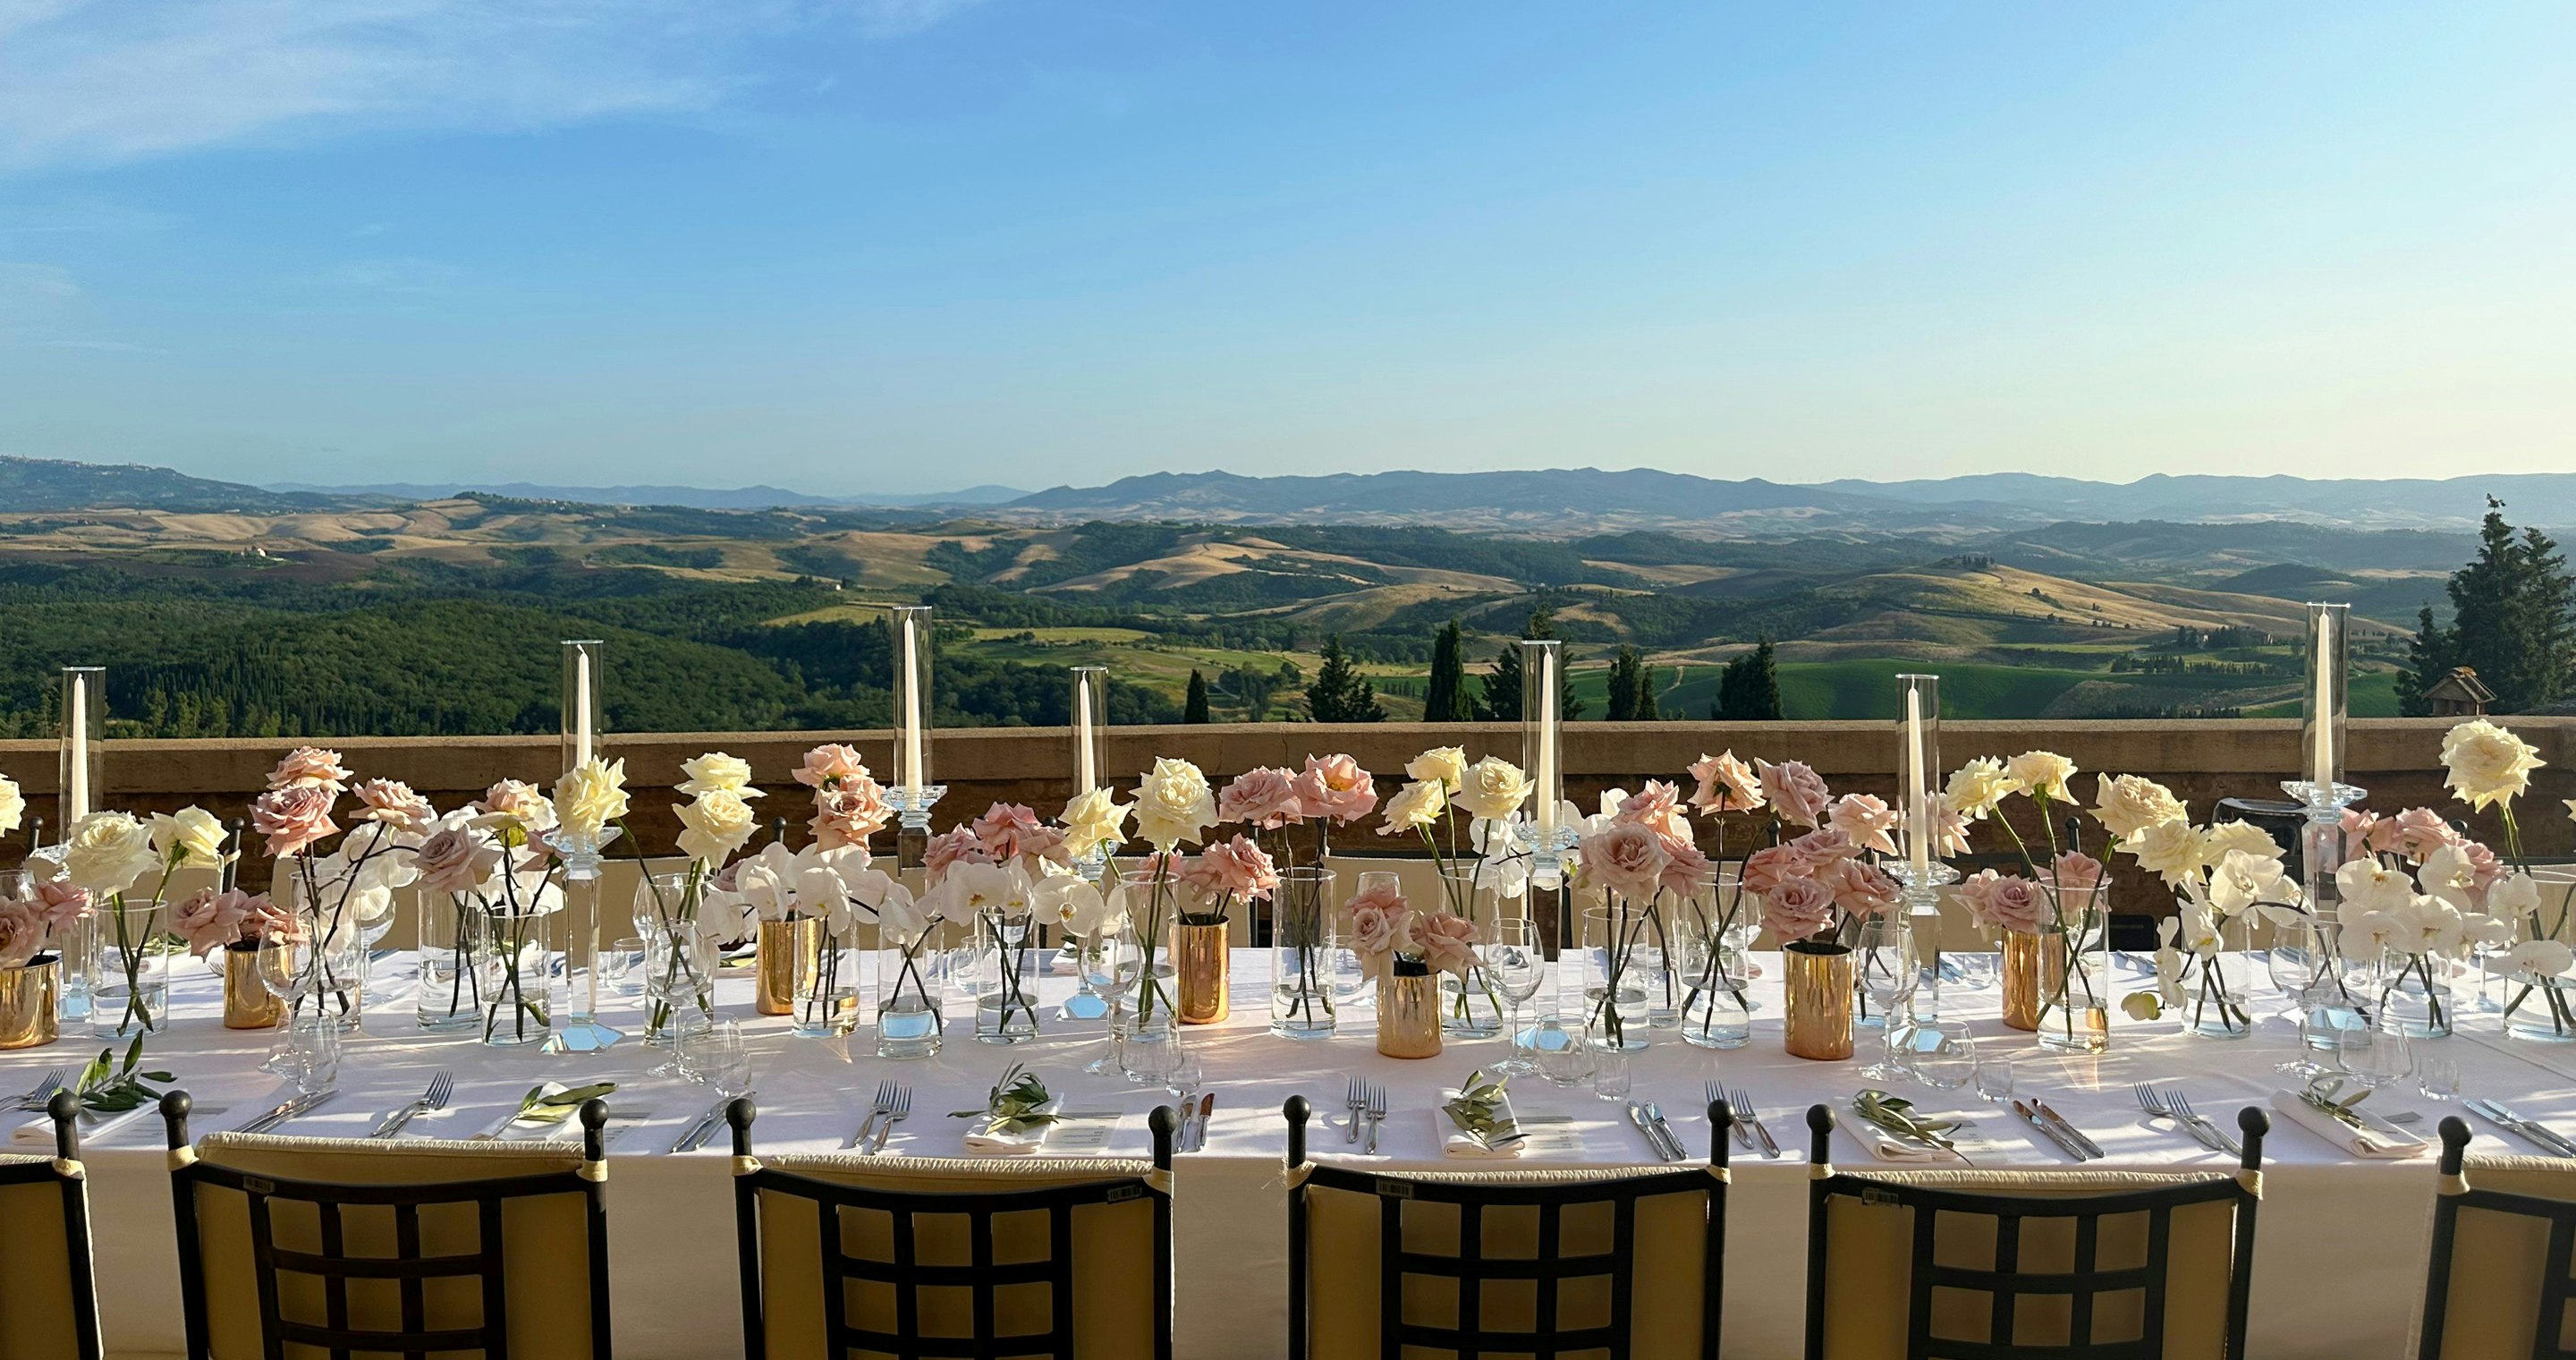 Private luxury events in Tuscany - Castelfalfi